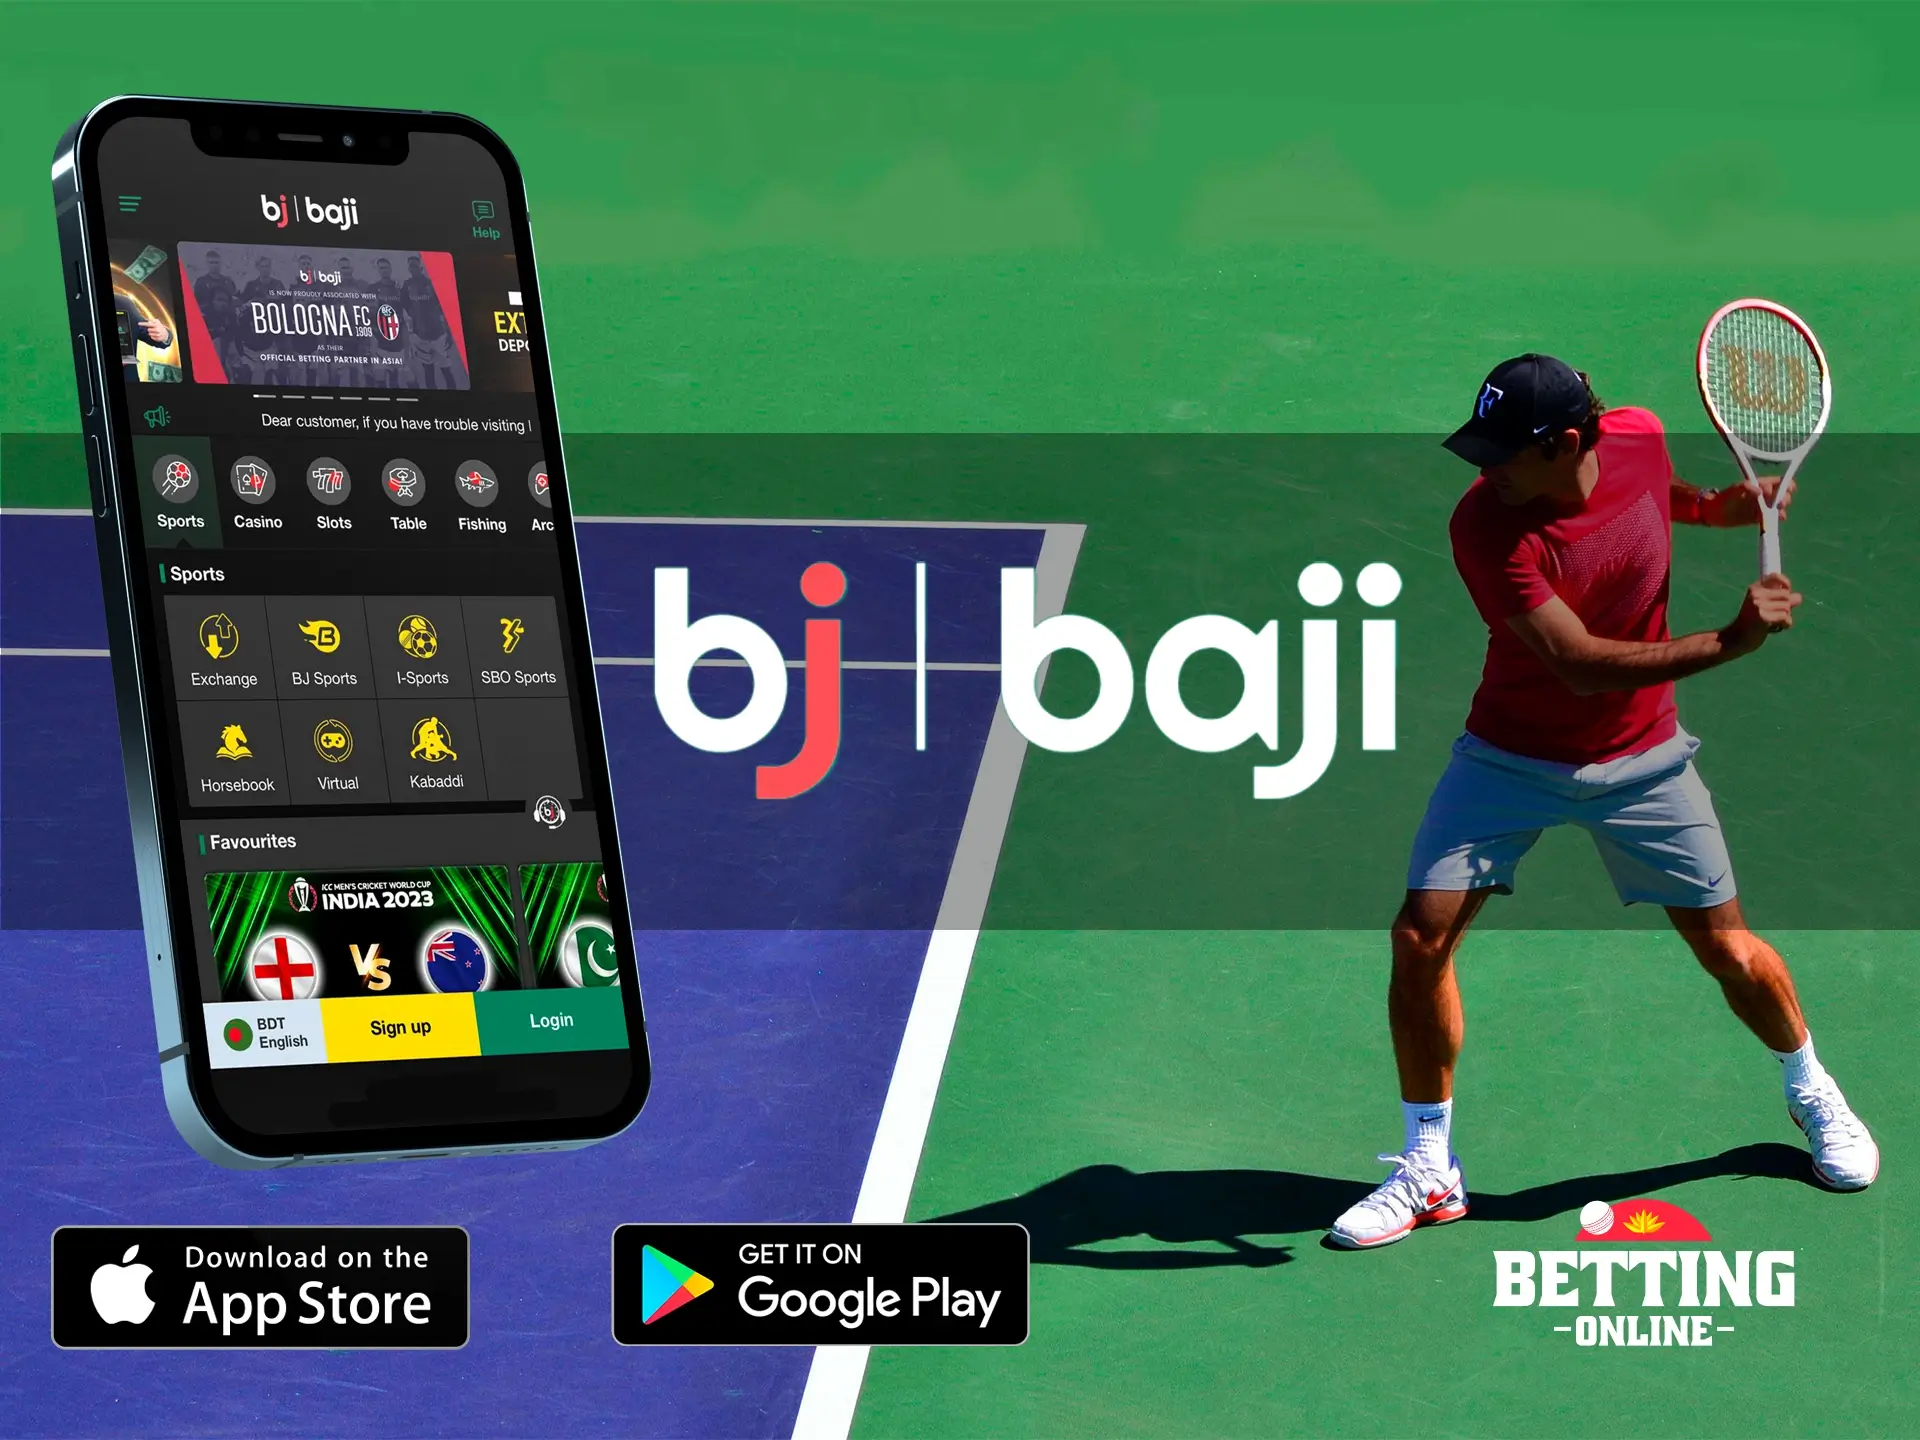 The baji app opens up new advantages for punters in the betting world.